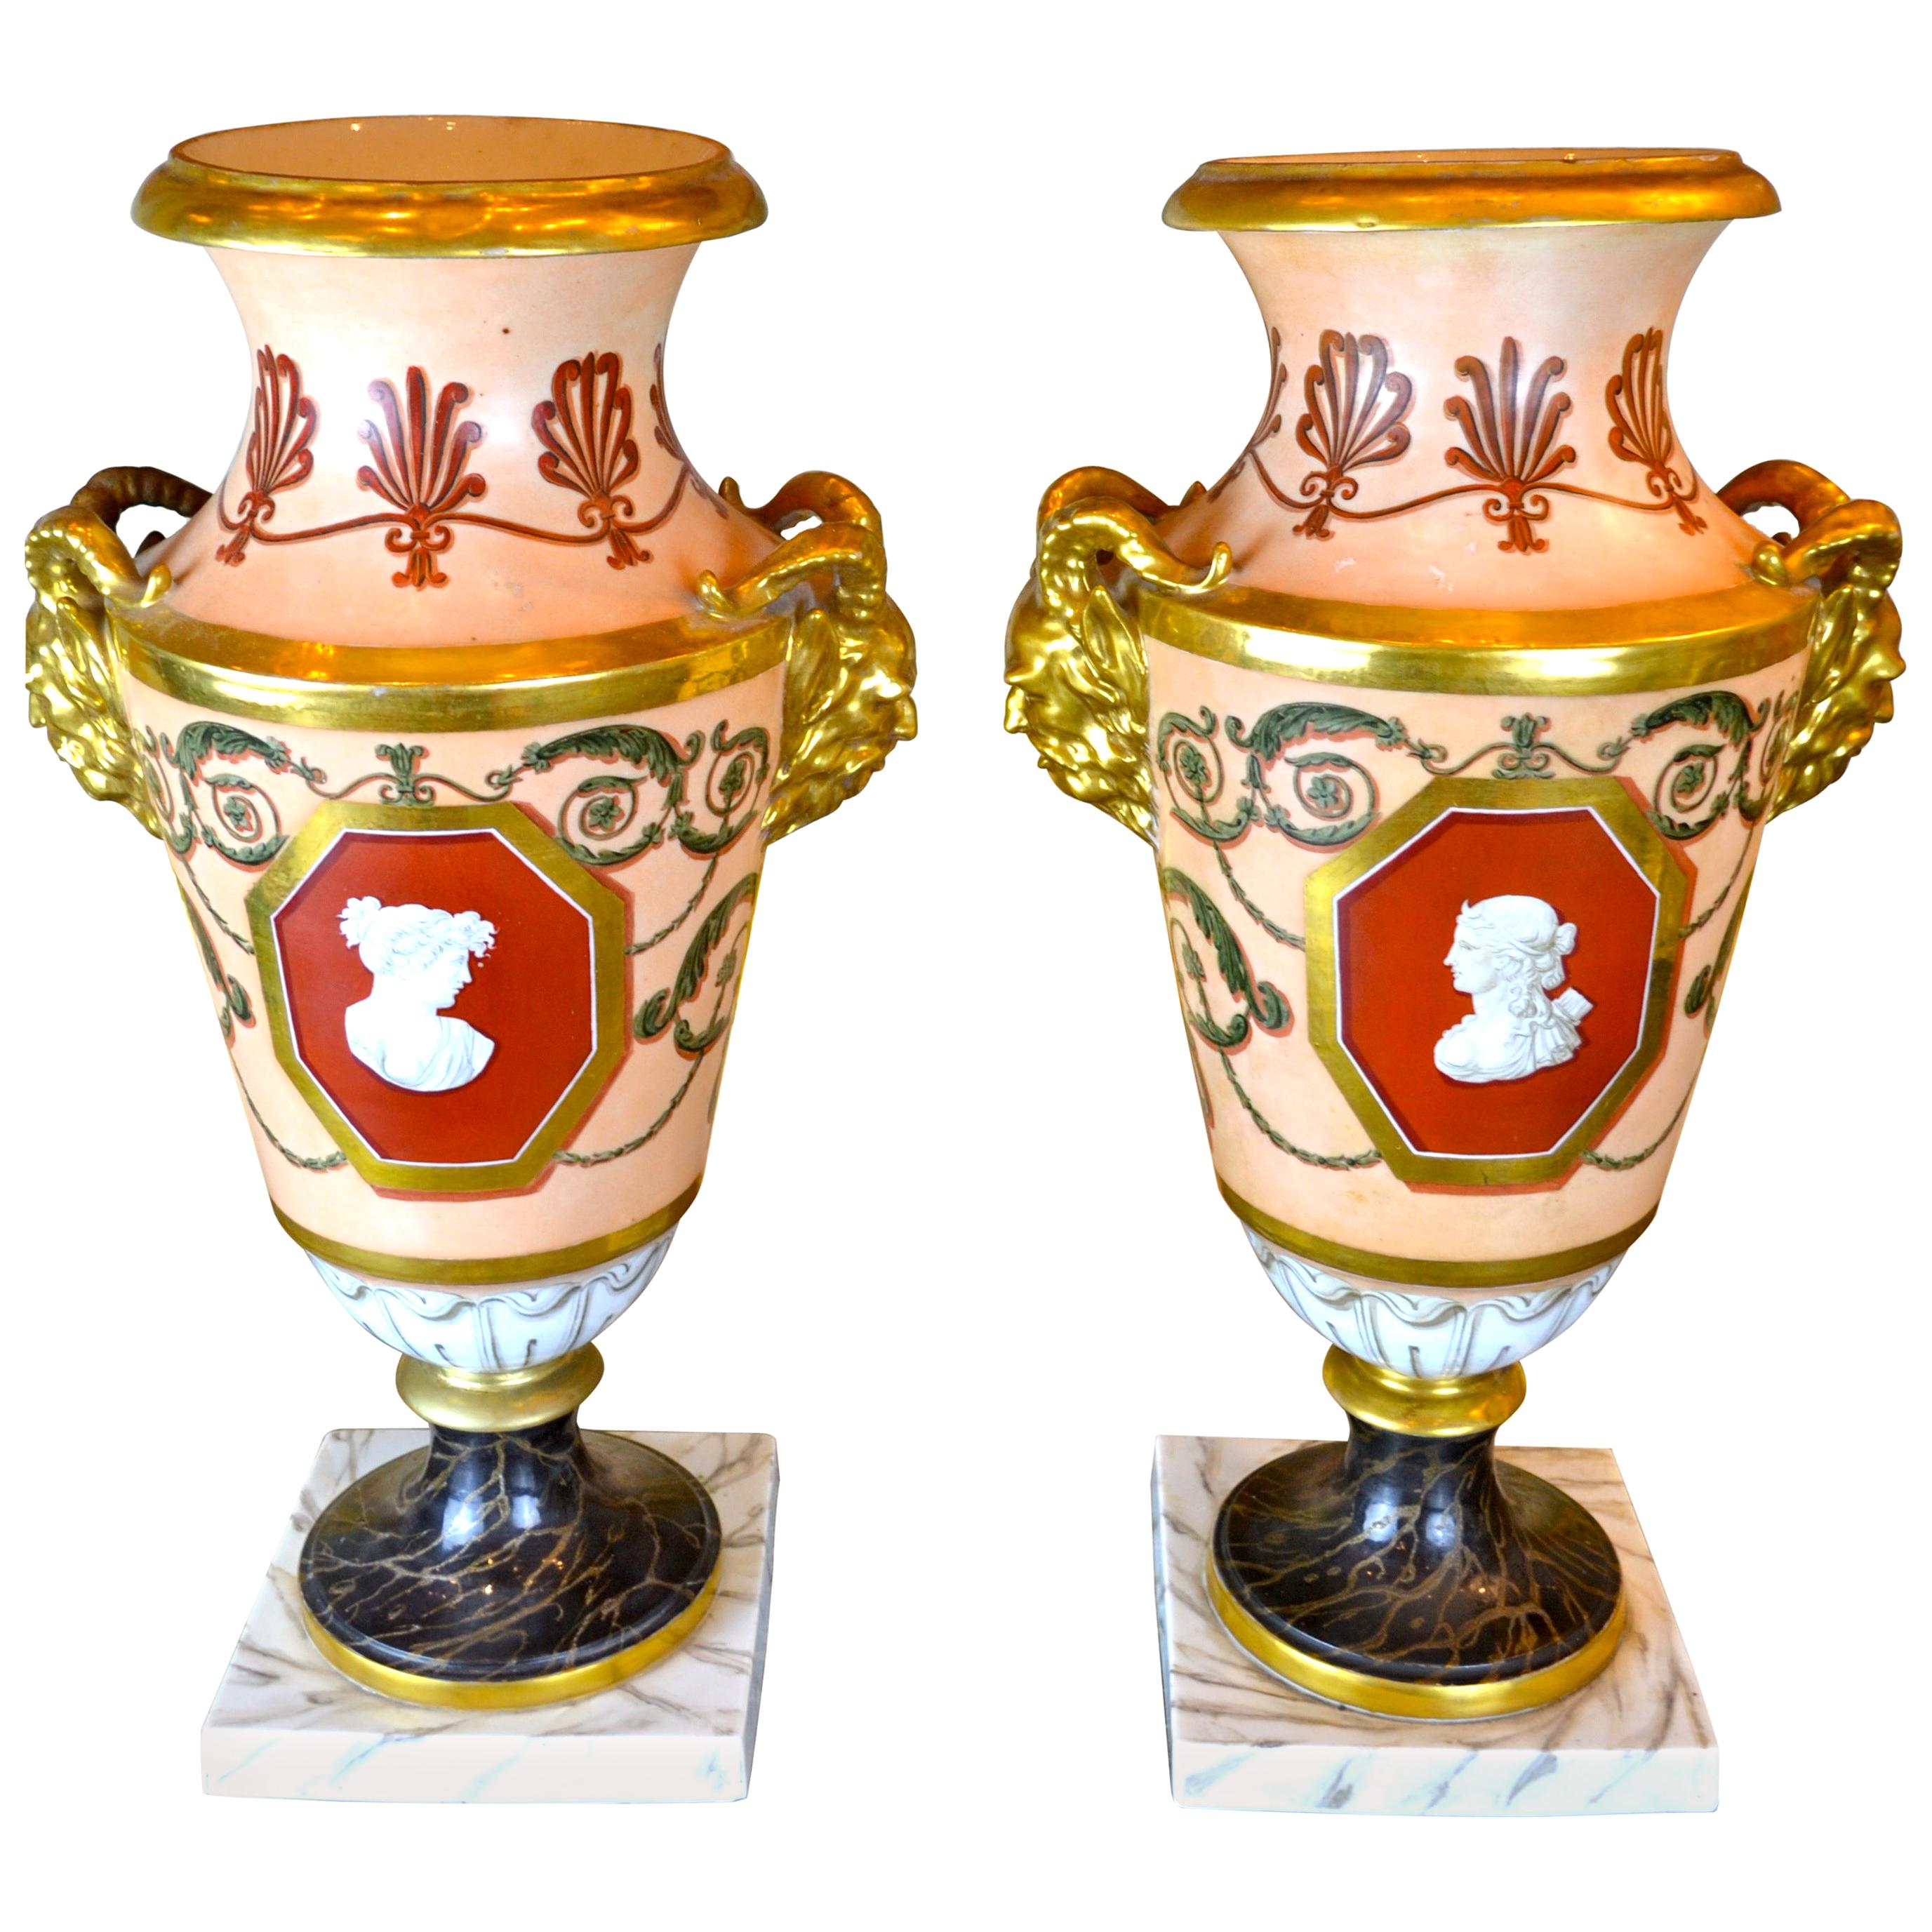 Pair of Early 19th Century Neoclassical ‘Old Paris’ Porcelain Vases